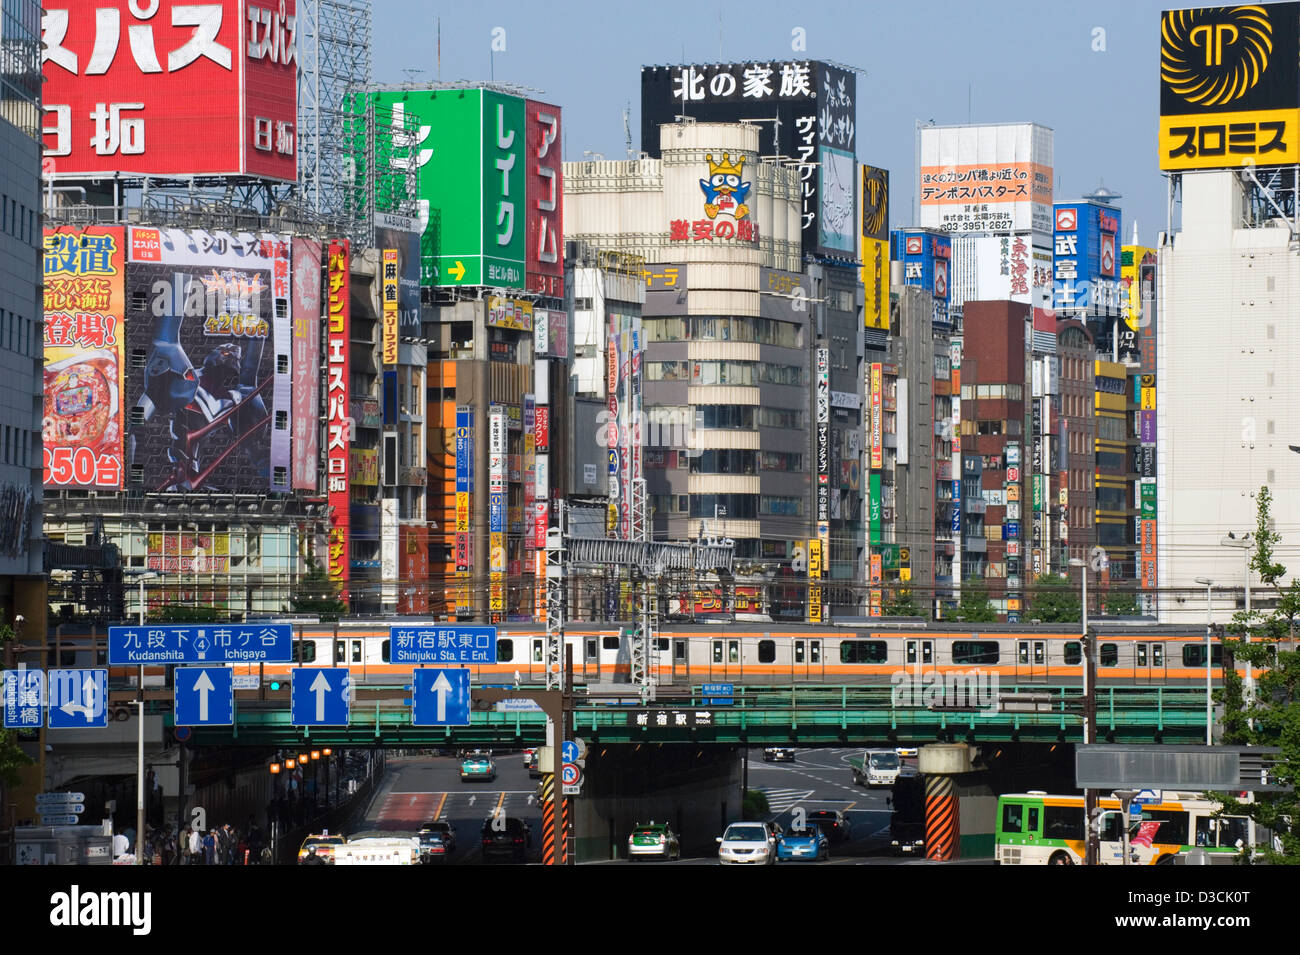 Cityscape skyline concrete jungle of buildings, signs, trains and cars in Kabuki-cho entertainment district East Shinjuku, Tokyo Stock Photo